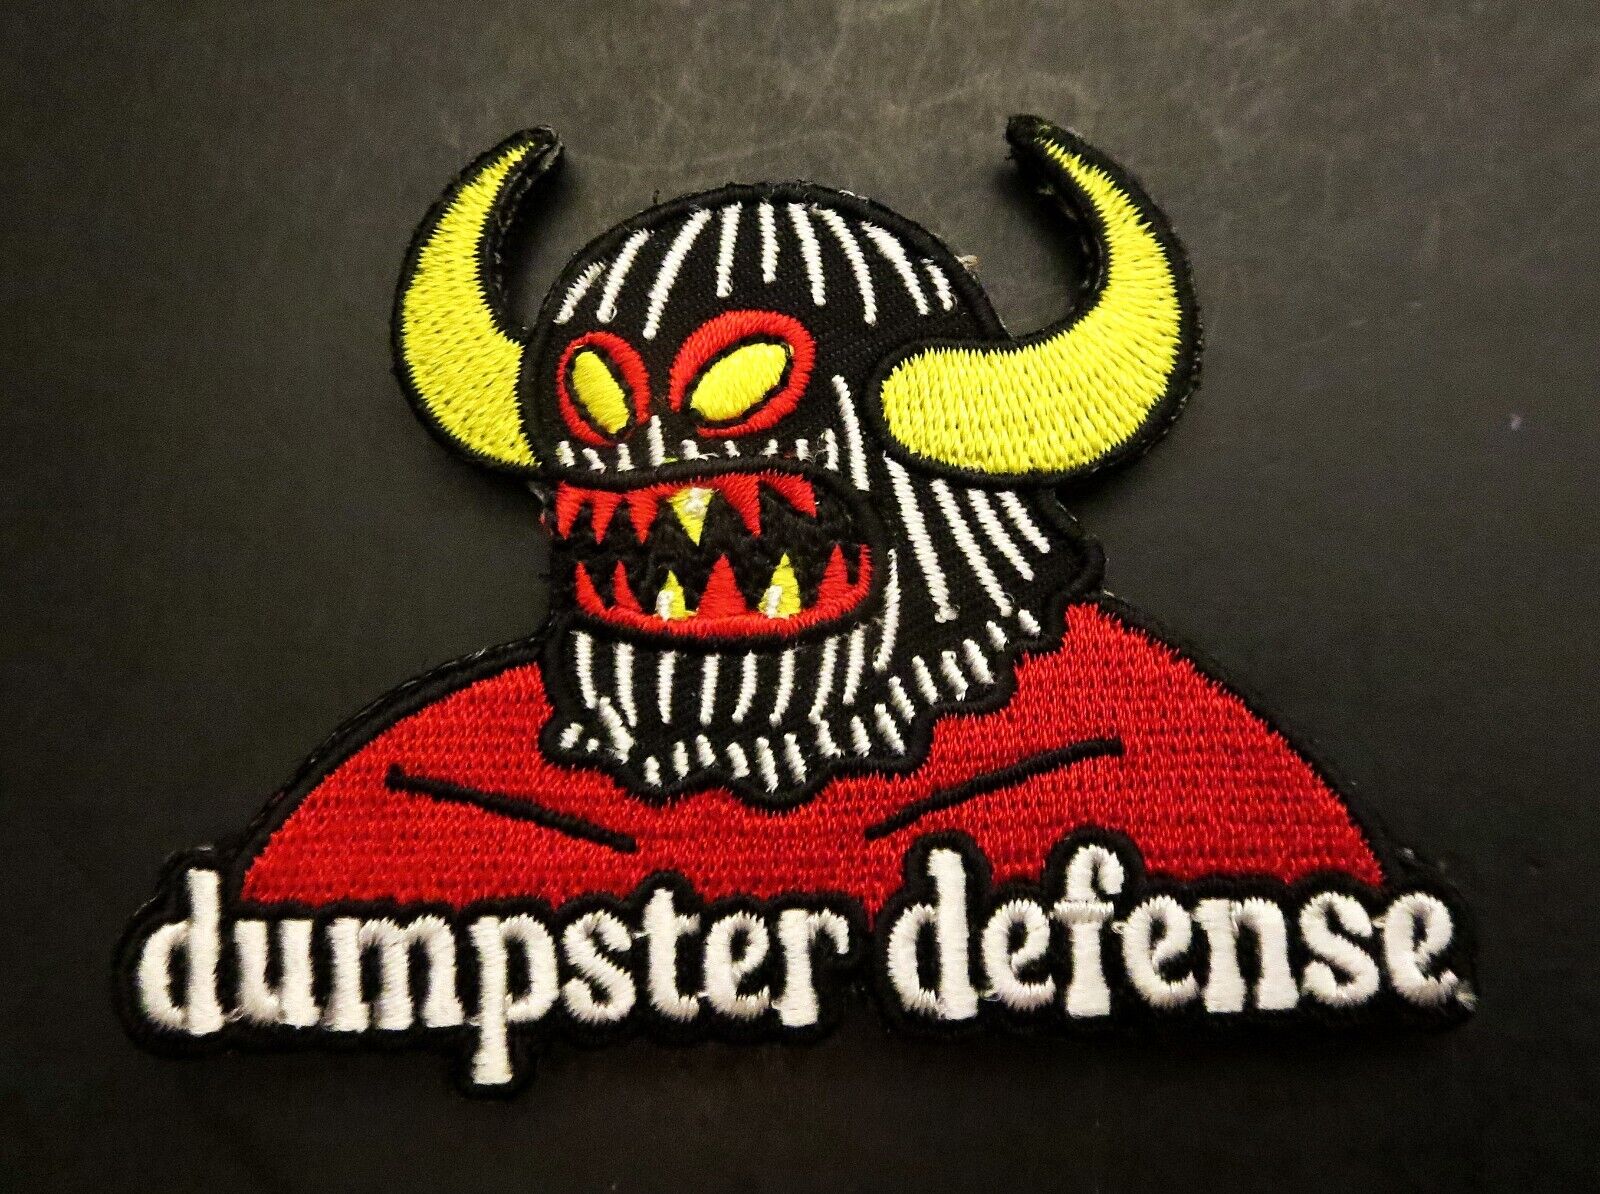 DUMPSTER DEFENSE MASK UP TOY MACHINE SKATEBOARDS EMBROIDERED PATCH IYSMYG WRMFZY